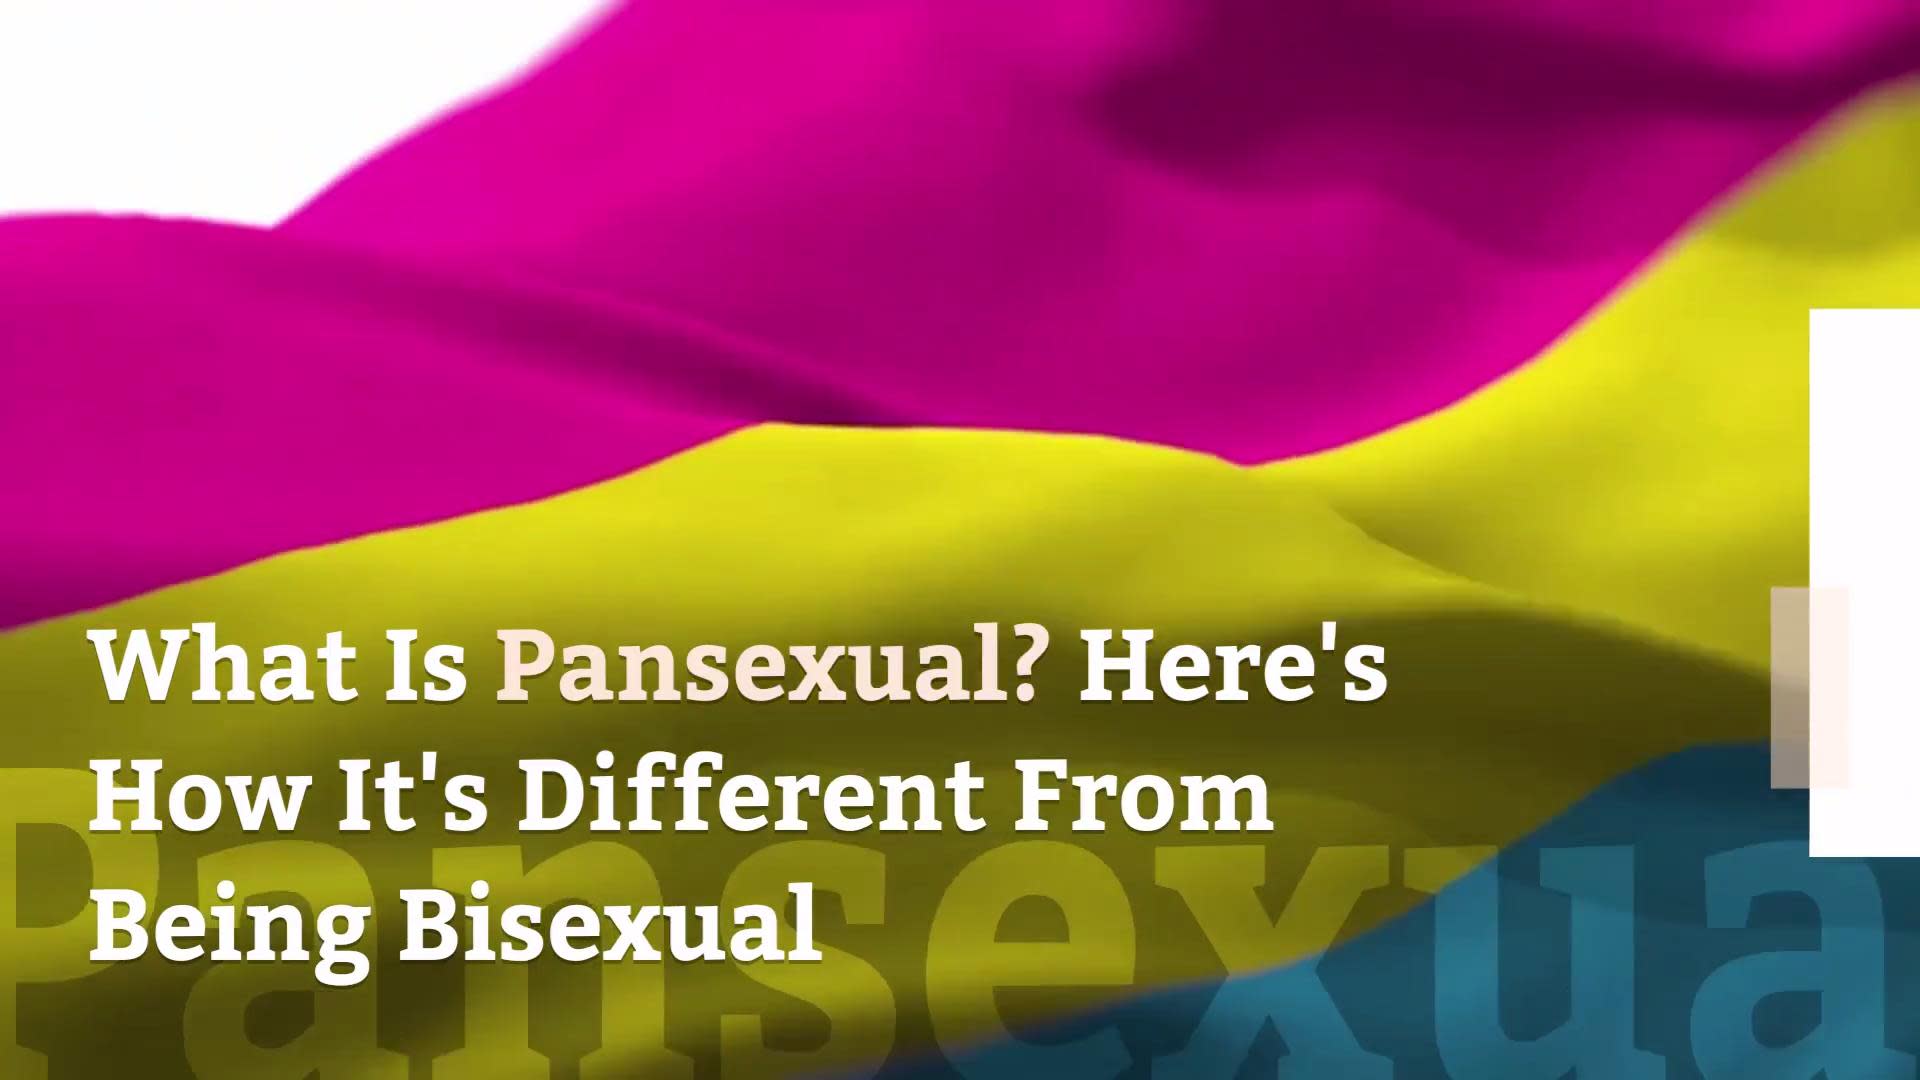 Pansexual meaning in malay